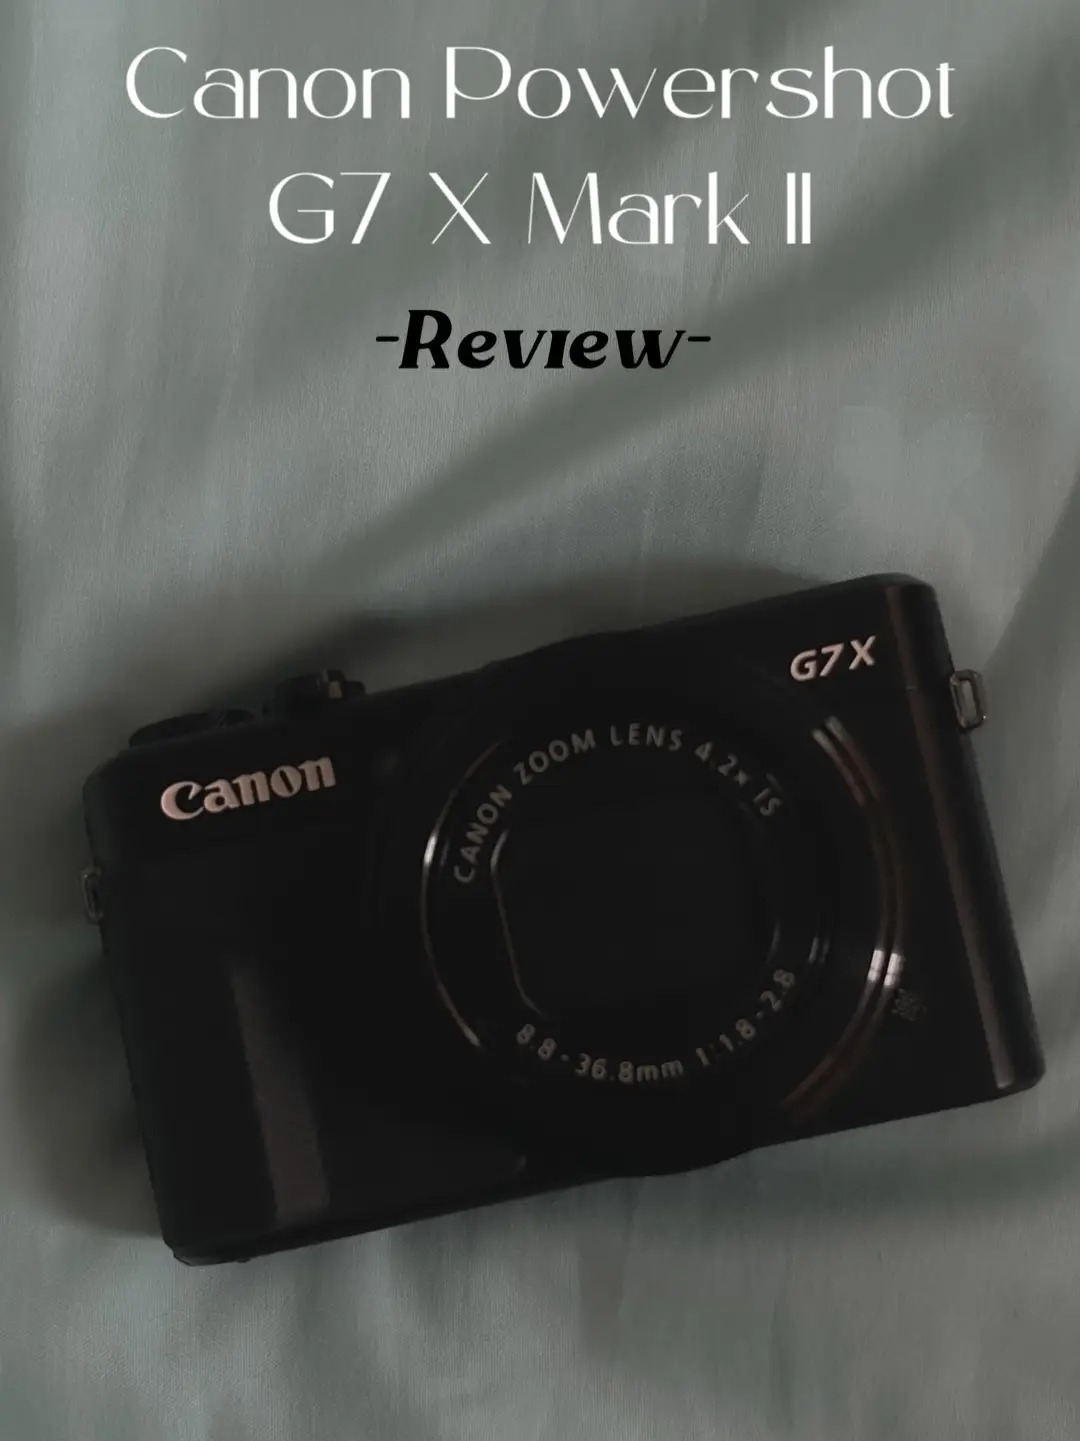 Canon Powershot G7 X Mark II Hands-On Preview